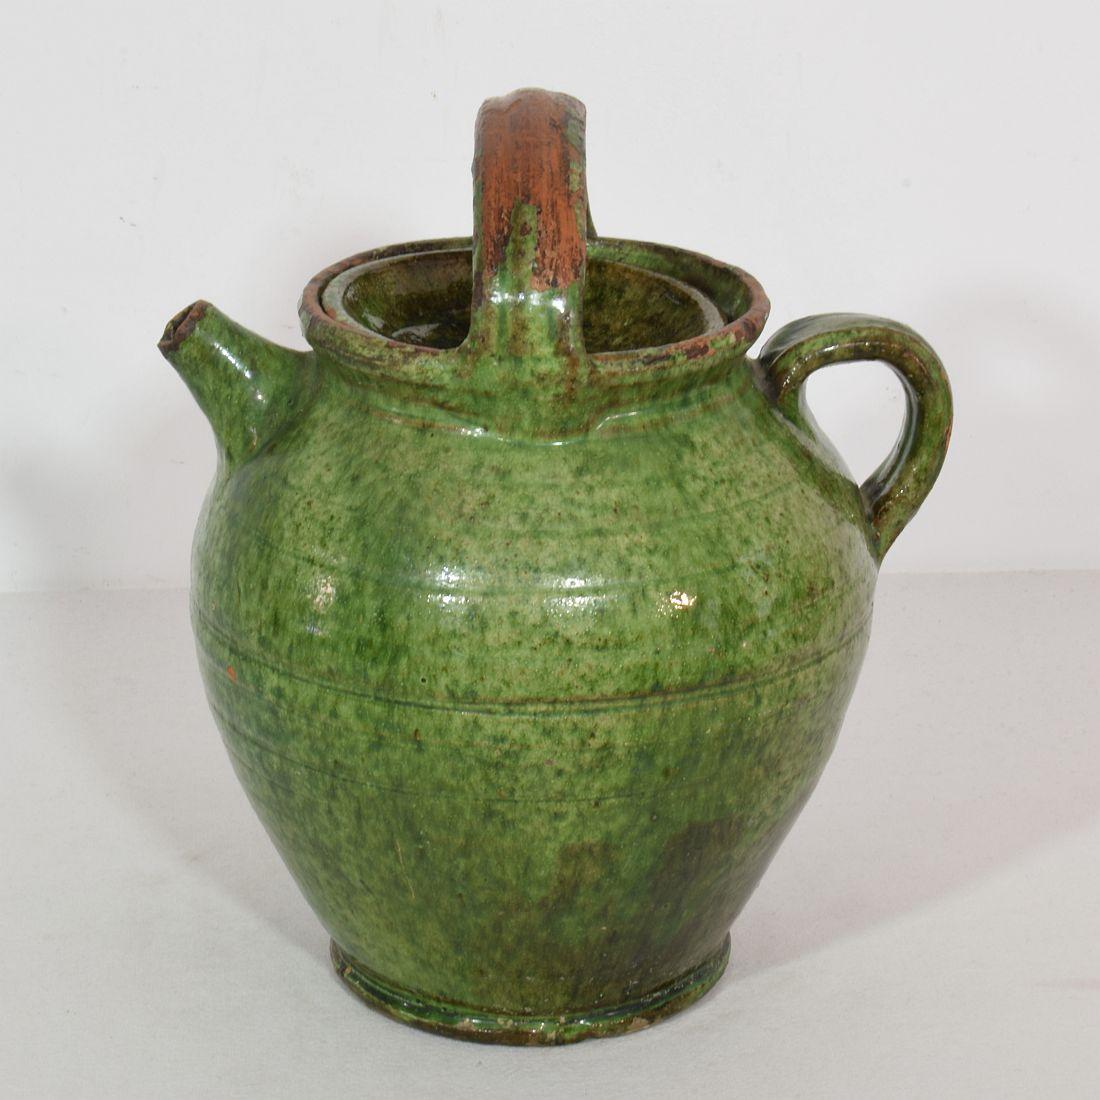 French Provincial 19th Century, French Green Glazed Terracotta Jug or Water Cruche